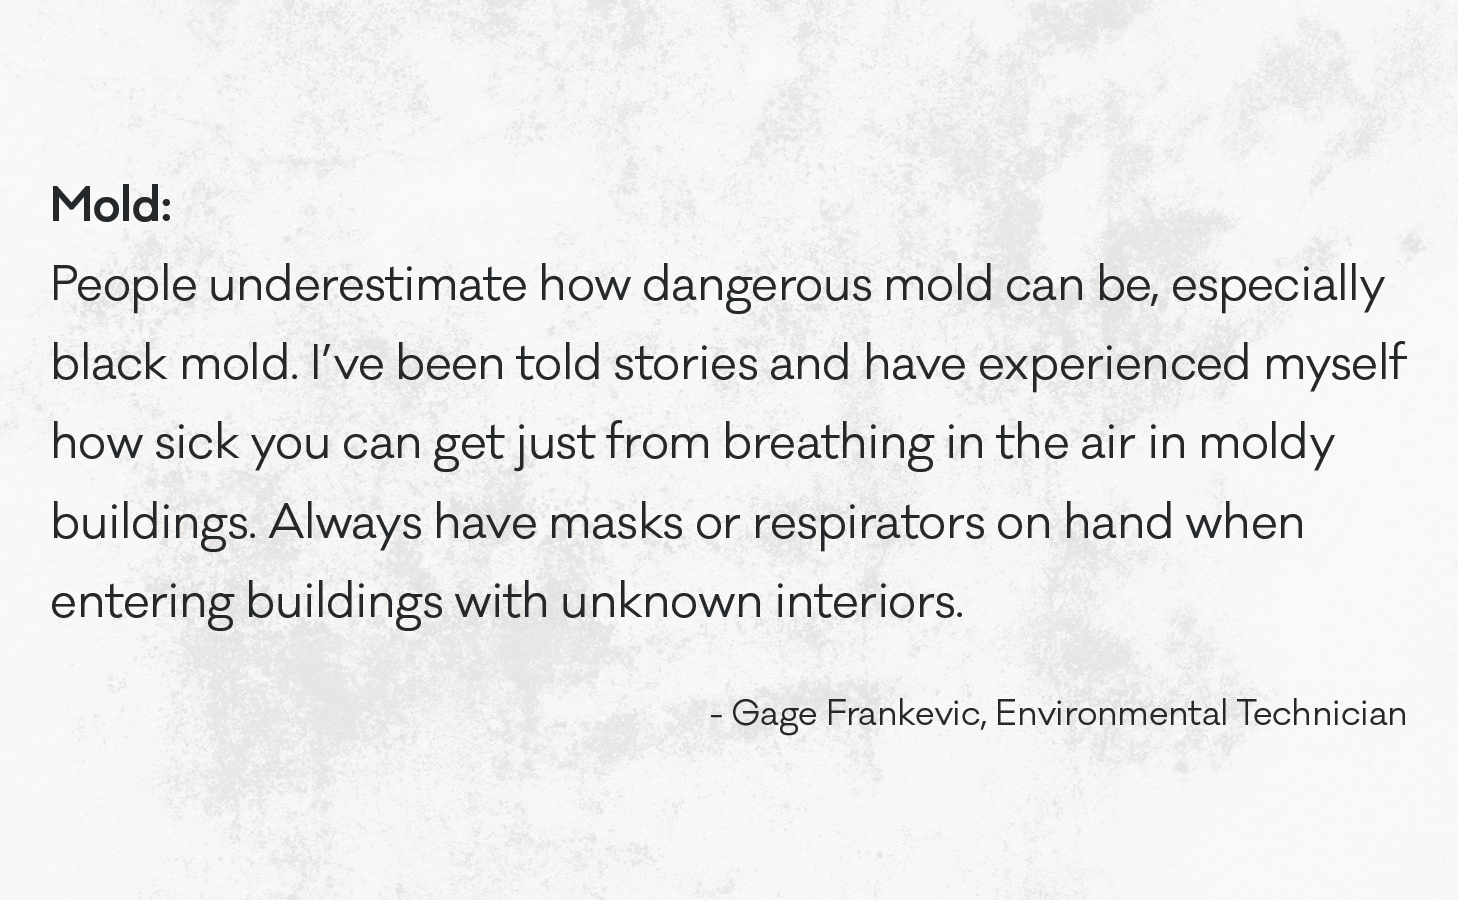 People underestimate how dangerous mold can be, especially black mold. I’ve been told stories and have experienced myself how sick you can get just from breathing in the air in moldy buildings. Always have masks or respirators on hand when entering buildings with unknown interiors.